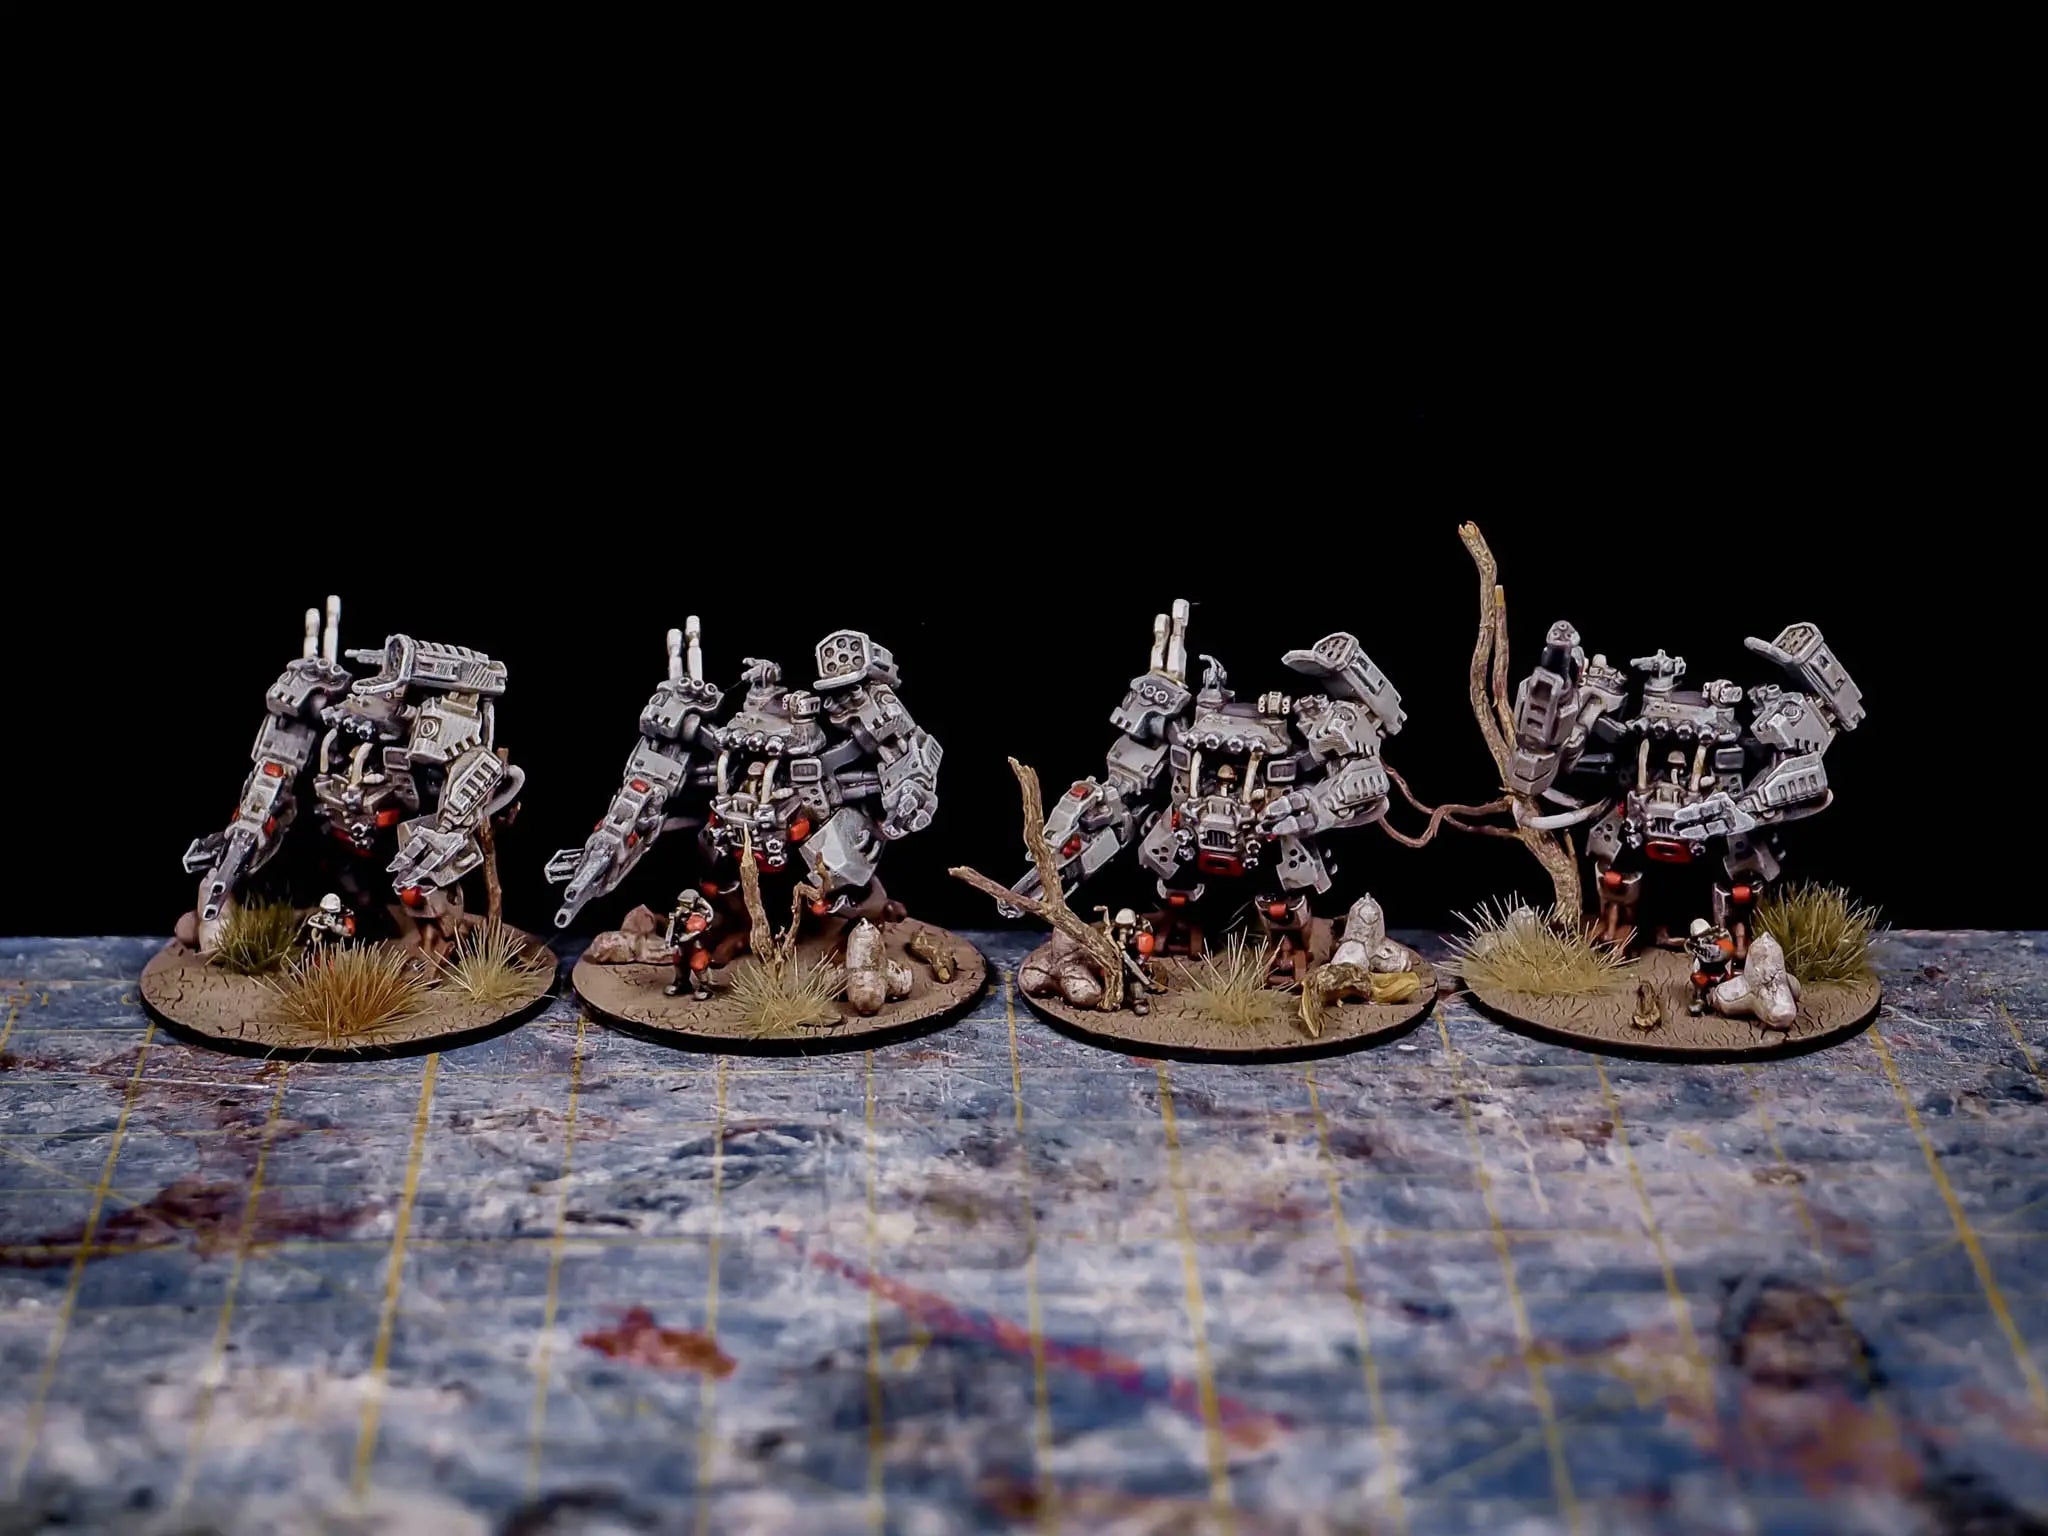 Walkers (8-pack) & Armoured Infantry (12) - The Enlisted The Lazy Forger